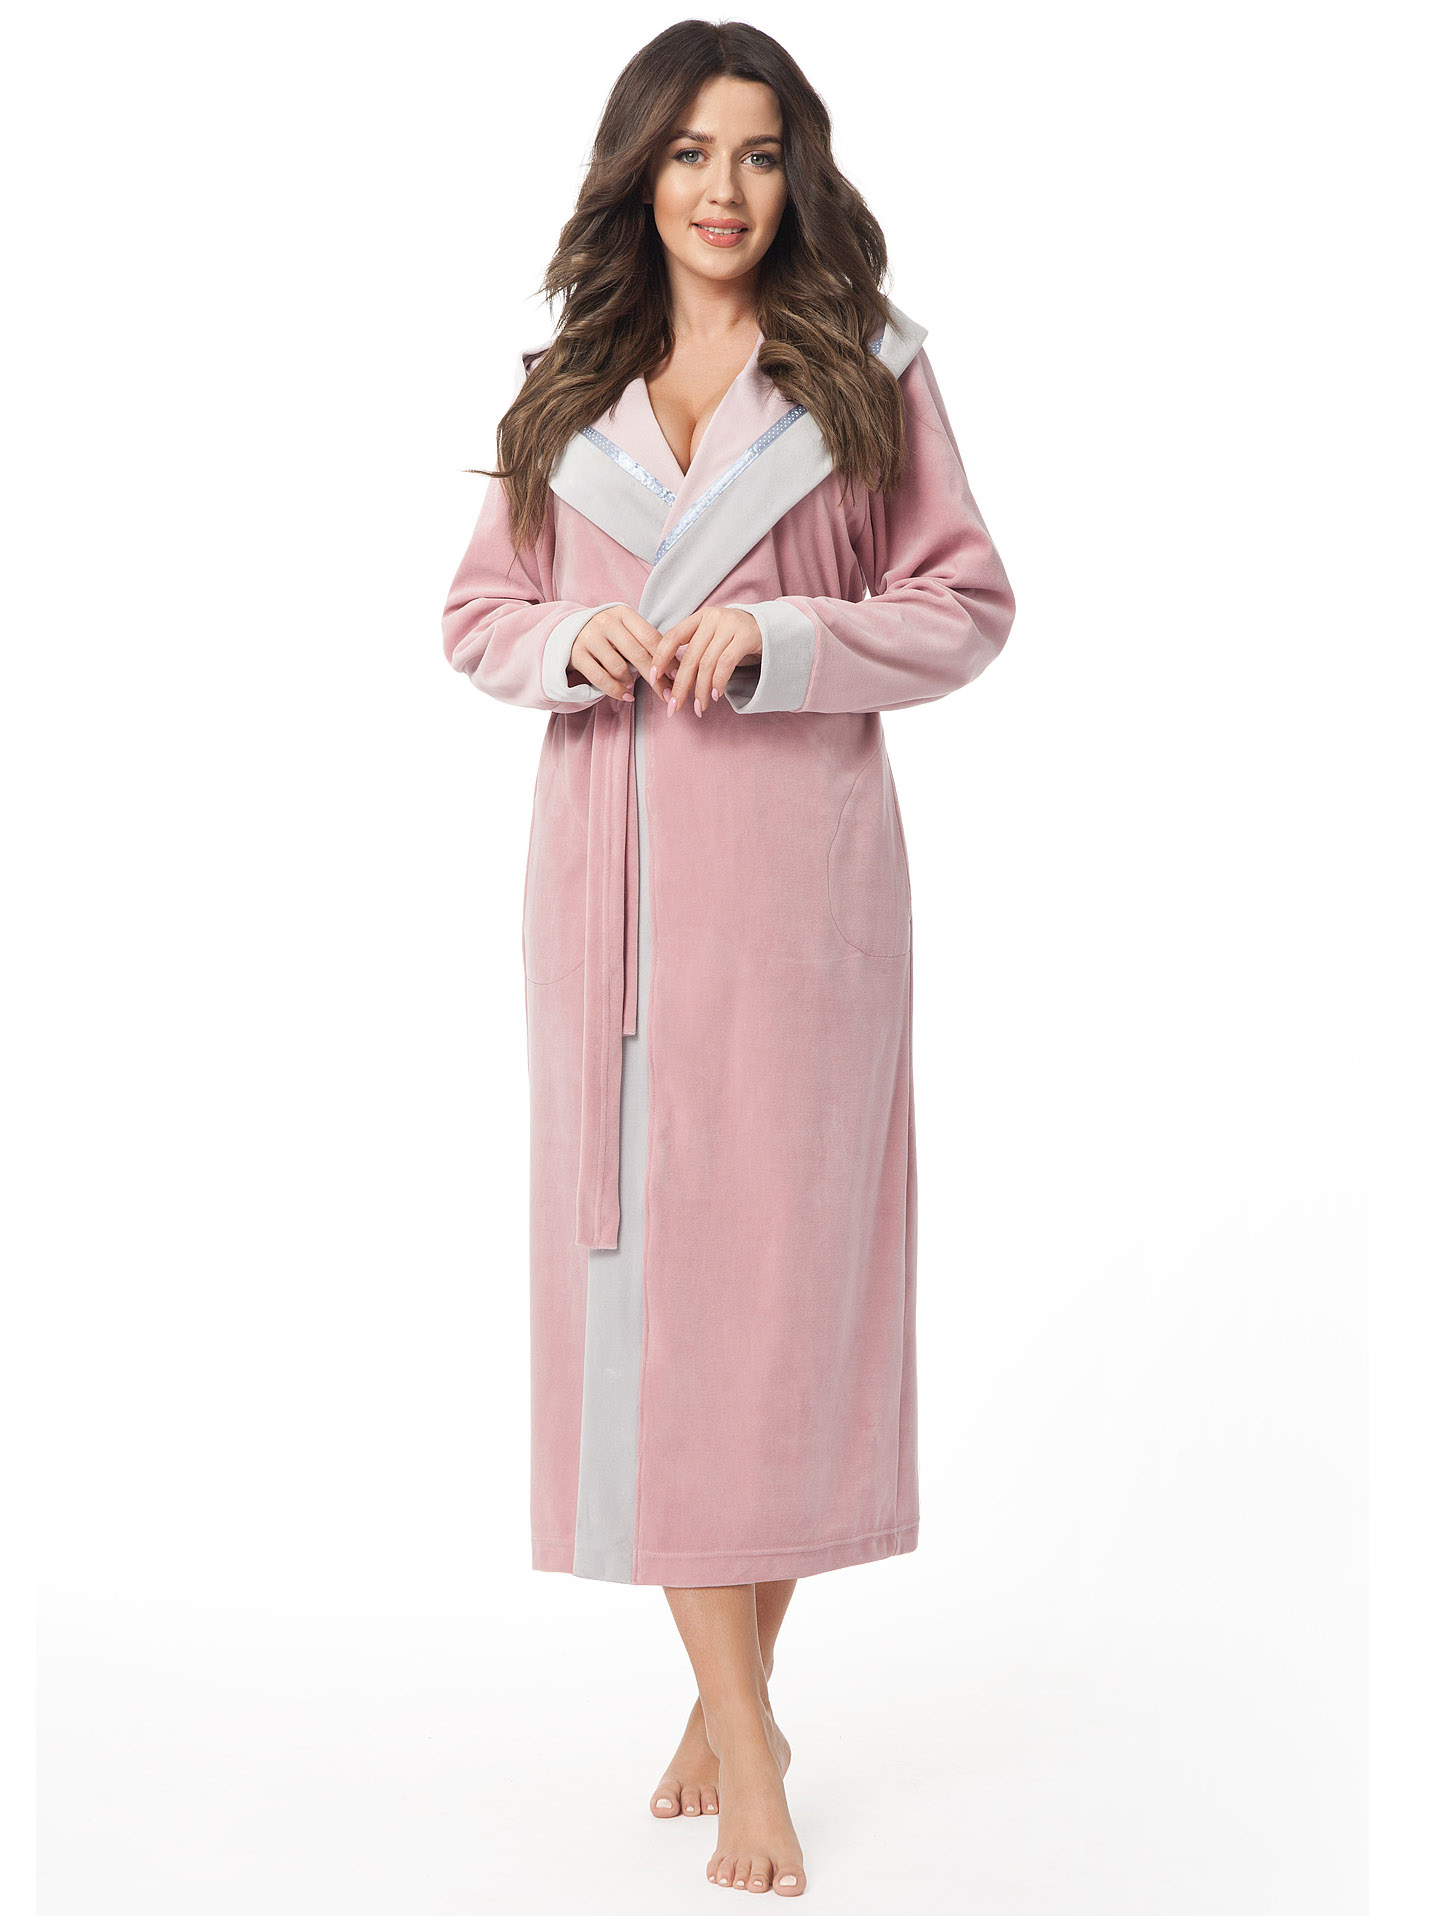 Women's velor dressing gown with shawl collar Dorota FR-299 S Sale #1